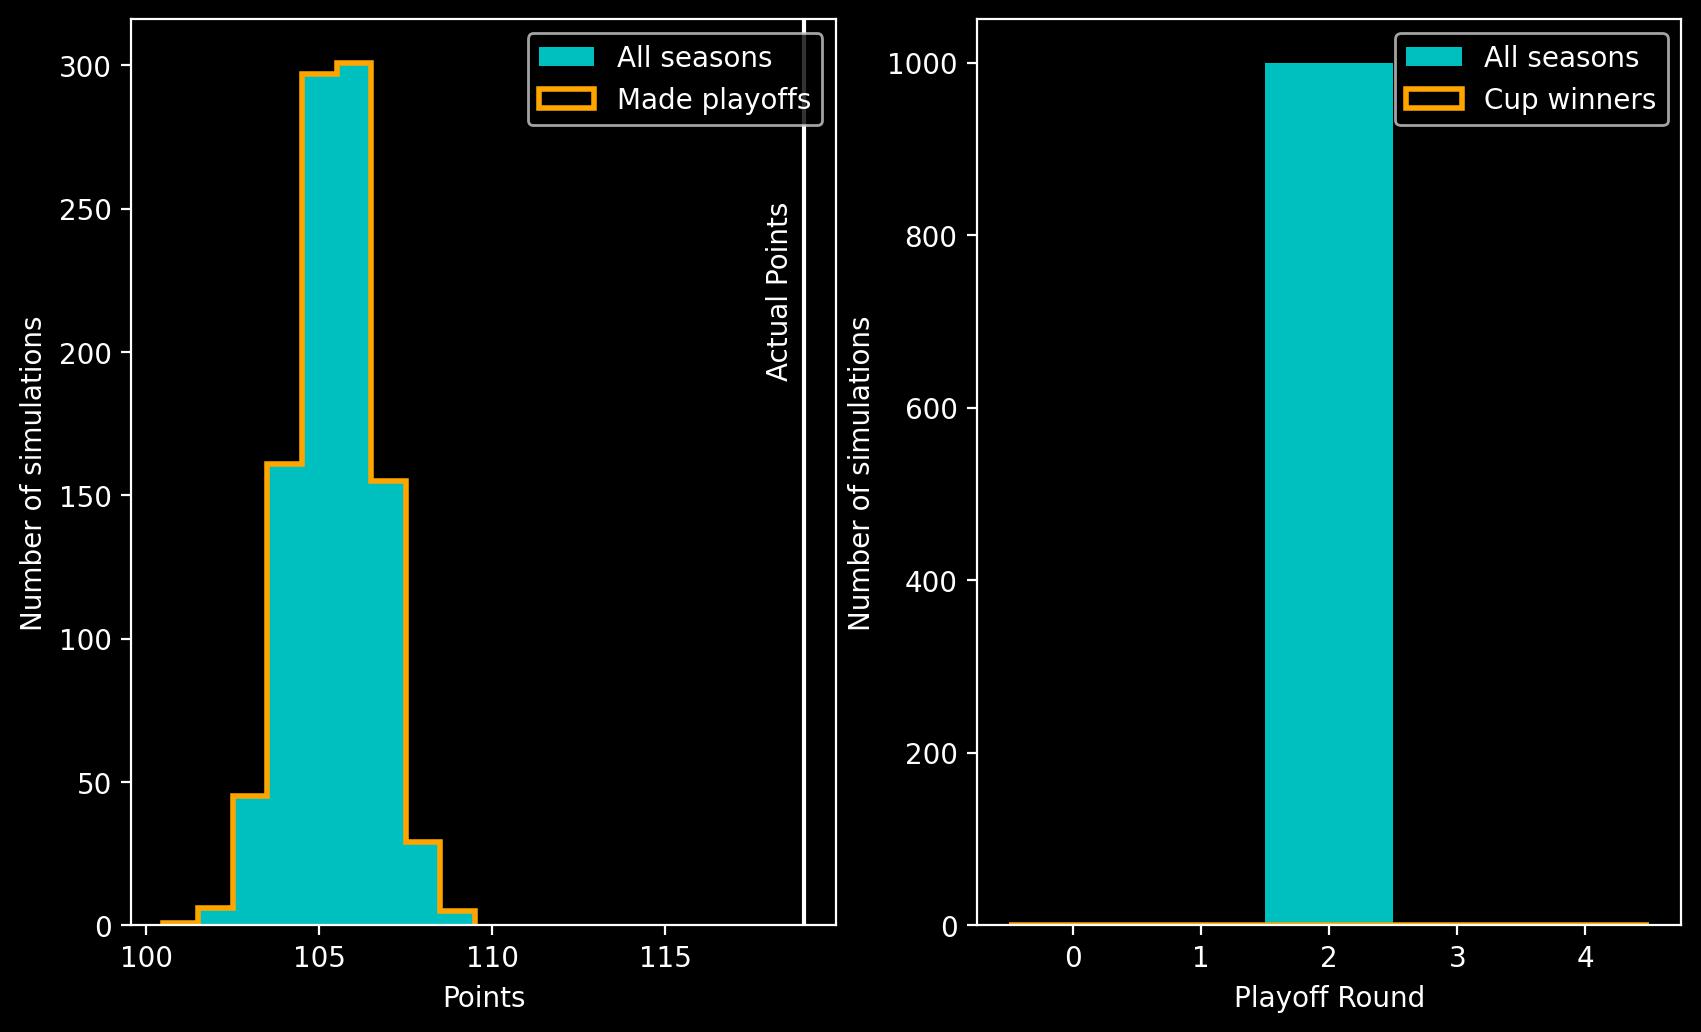 Two panel plot showing histograms. Left panel shows a histogram of points on the x-axis against number of simulations on the y-axis, the peak is at 105 points. Right panel shows playoff round on the x-axis against number of simulations on the y-axis. The largest bar is at playoff round 2.